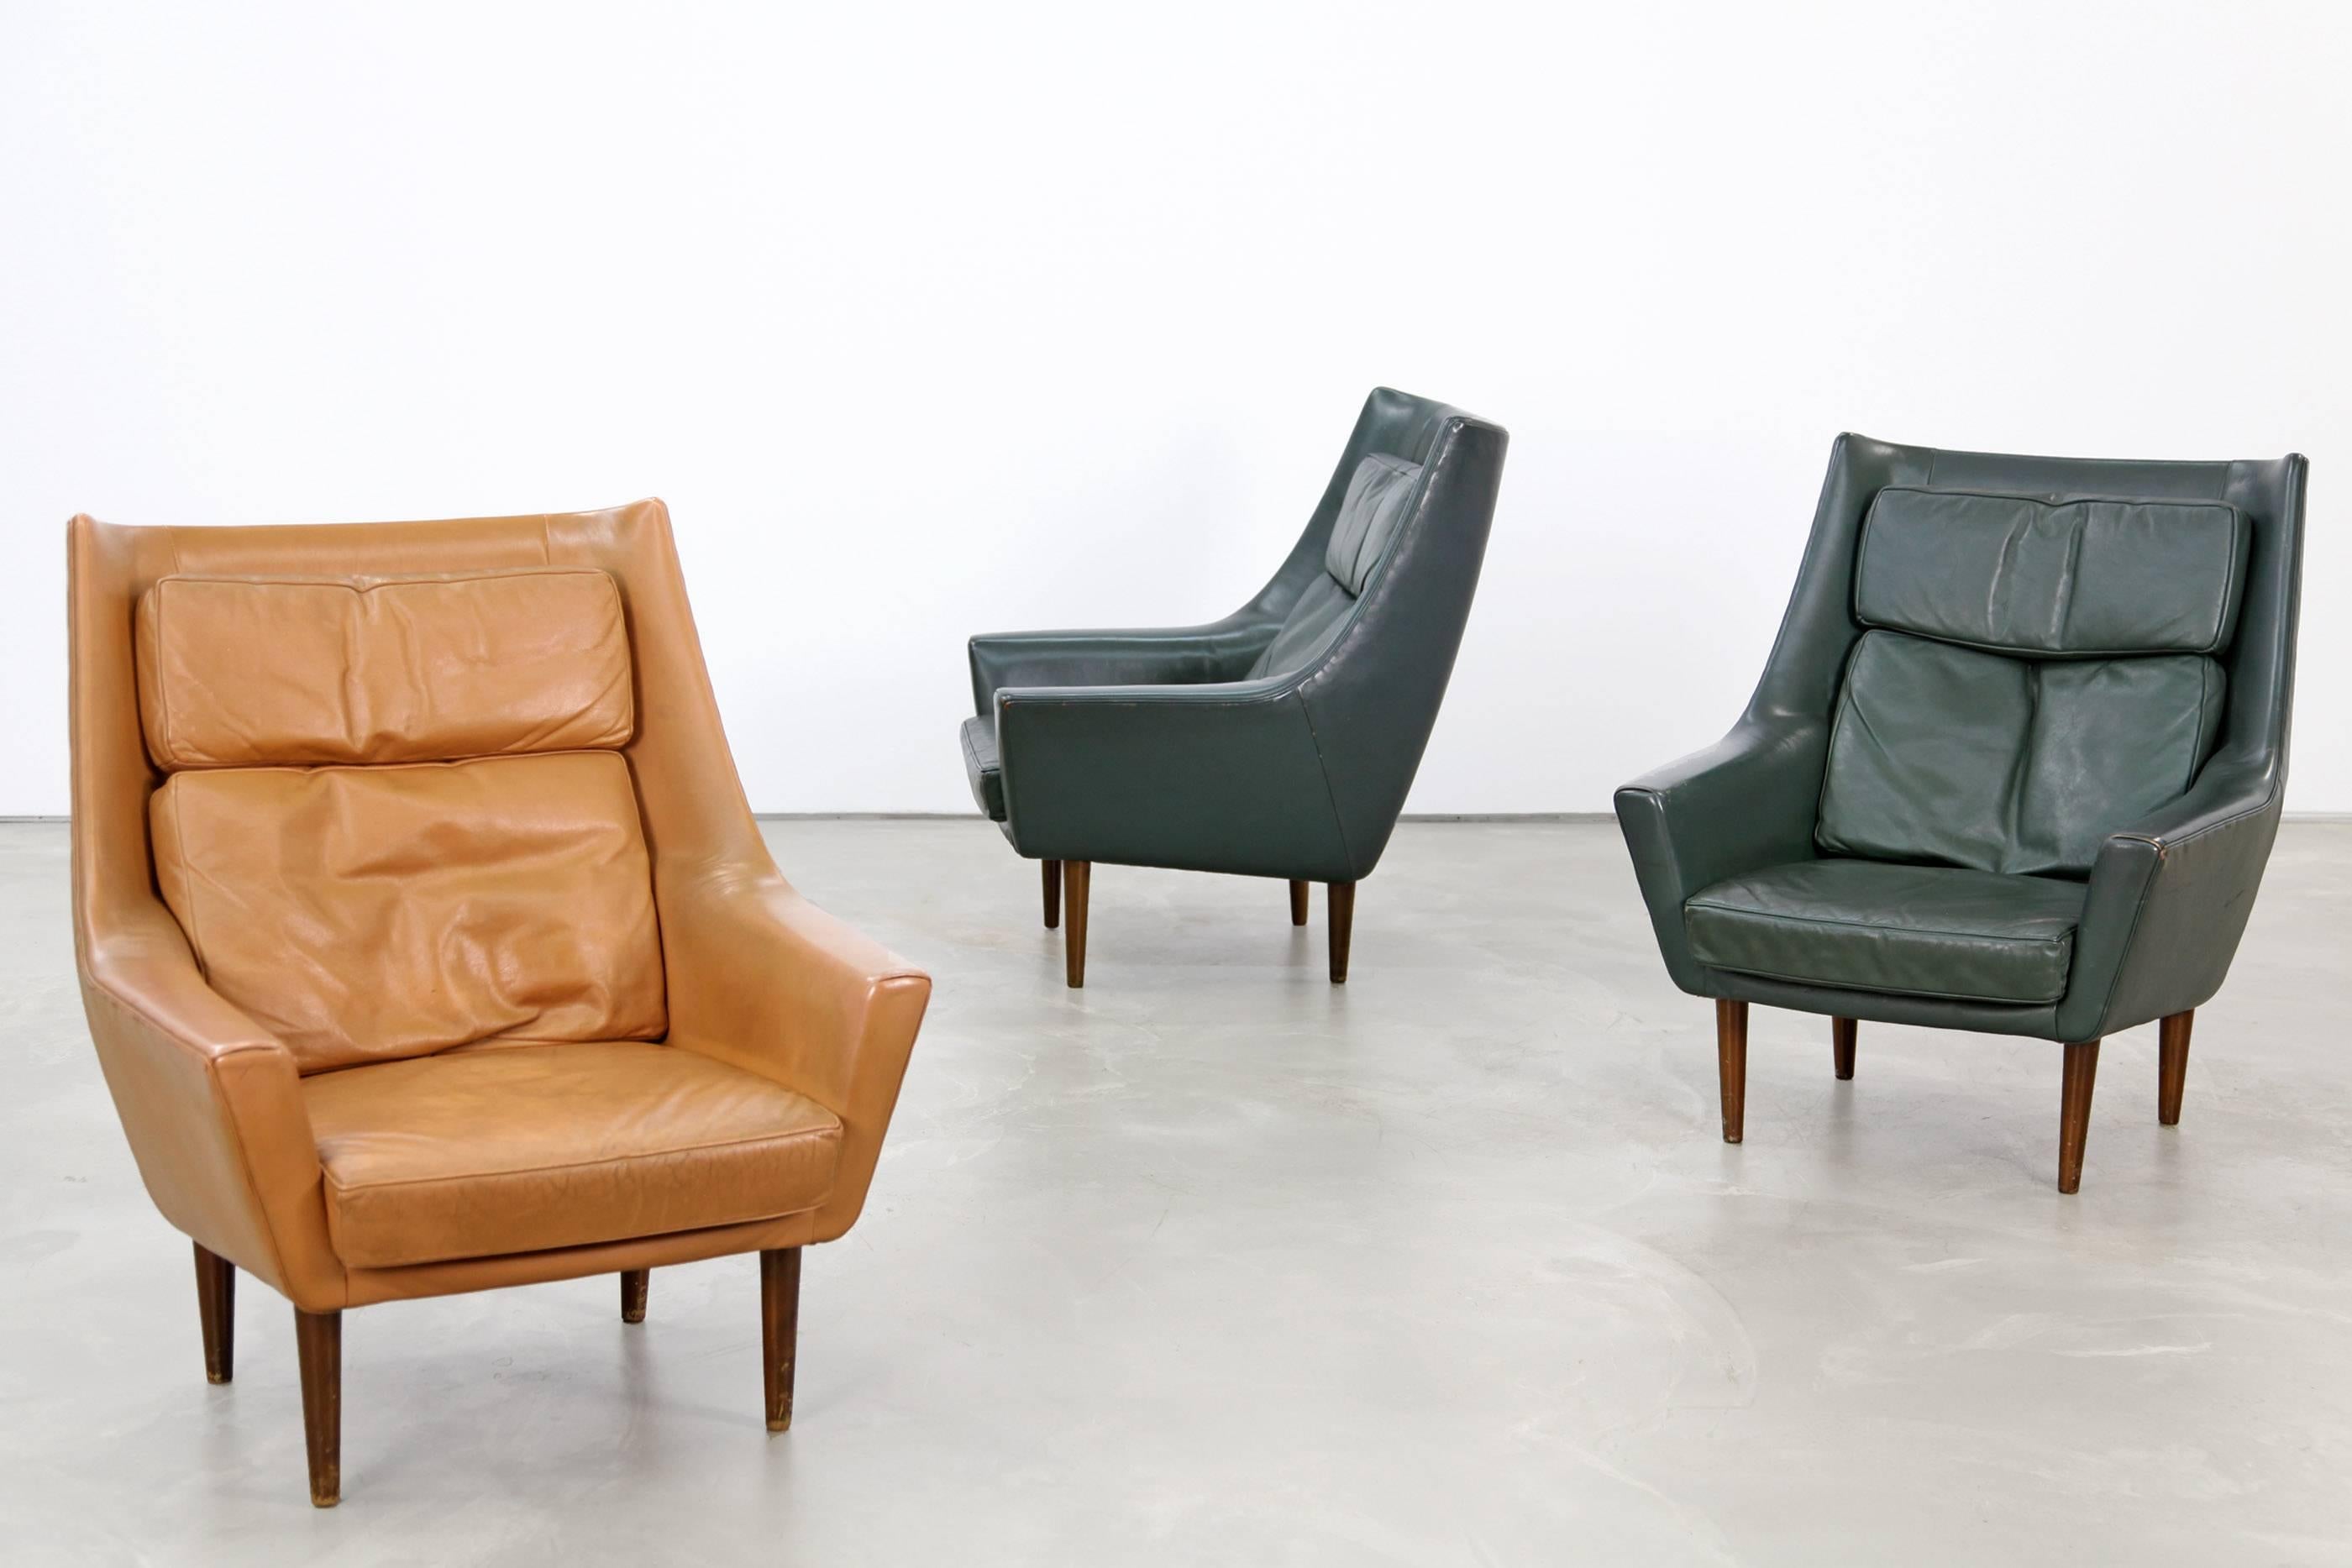 Beautiful set of two leather lounge chairs from the 1960s. These chairs were produced in Denmark, the design is attributed to Hans Olsen. The chairs are upholstered in dark green original leather and are in beautifully patinated condition.